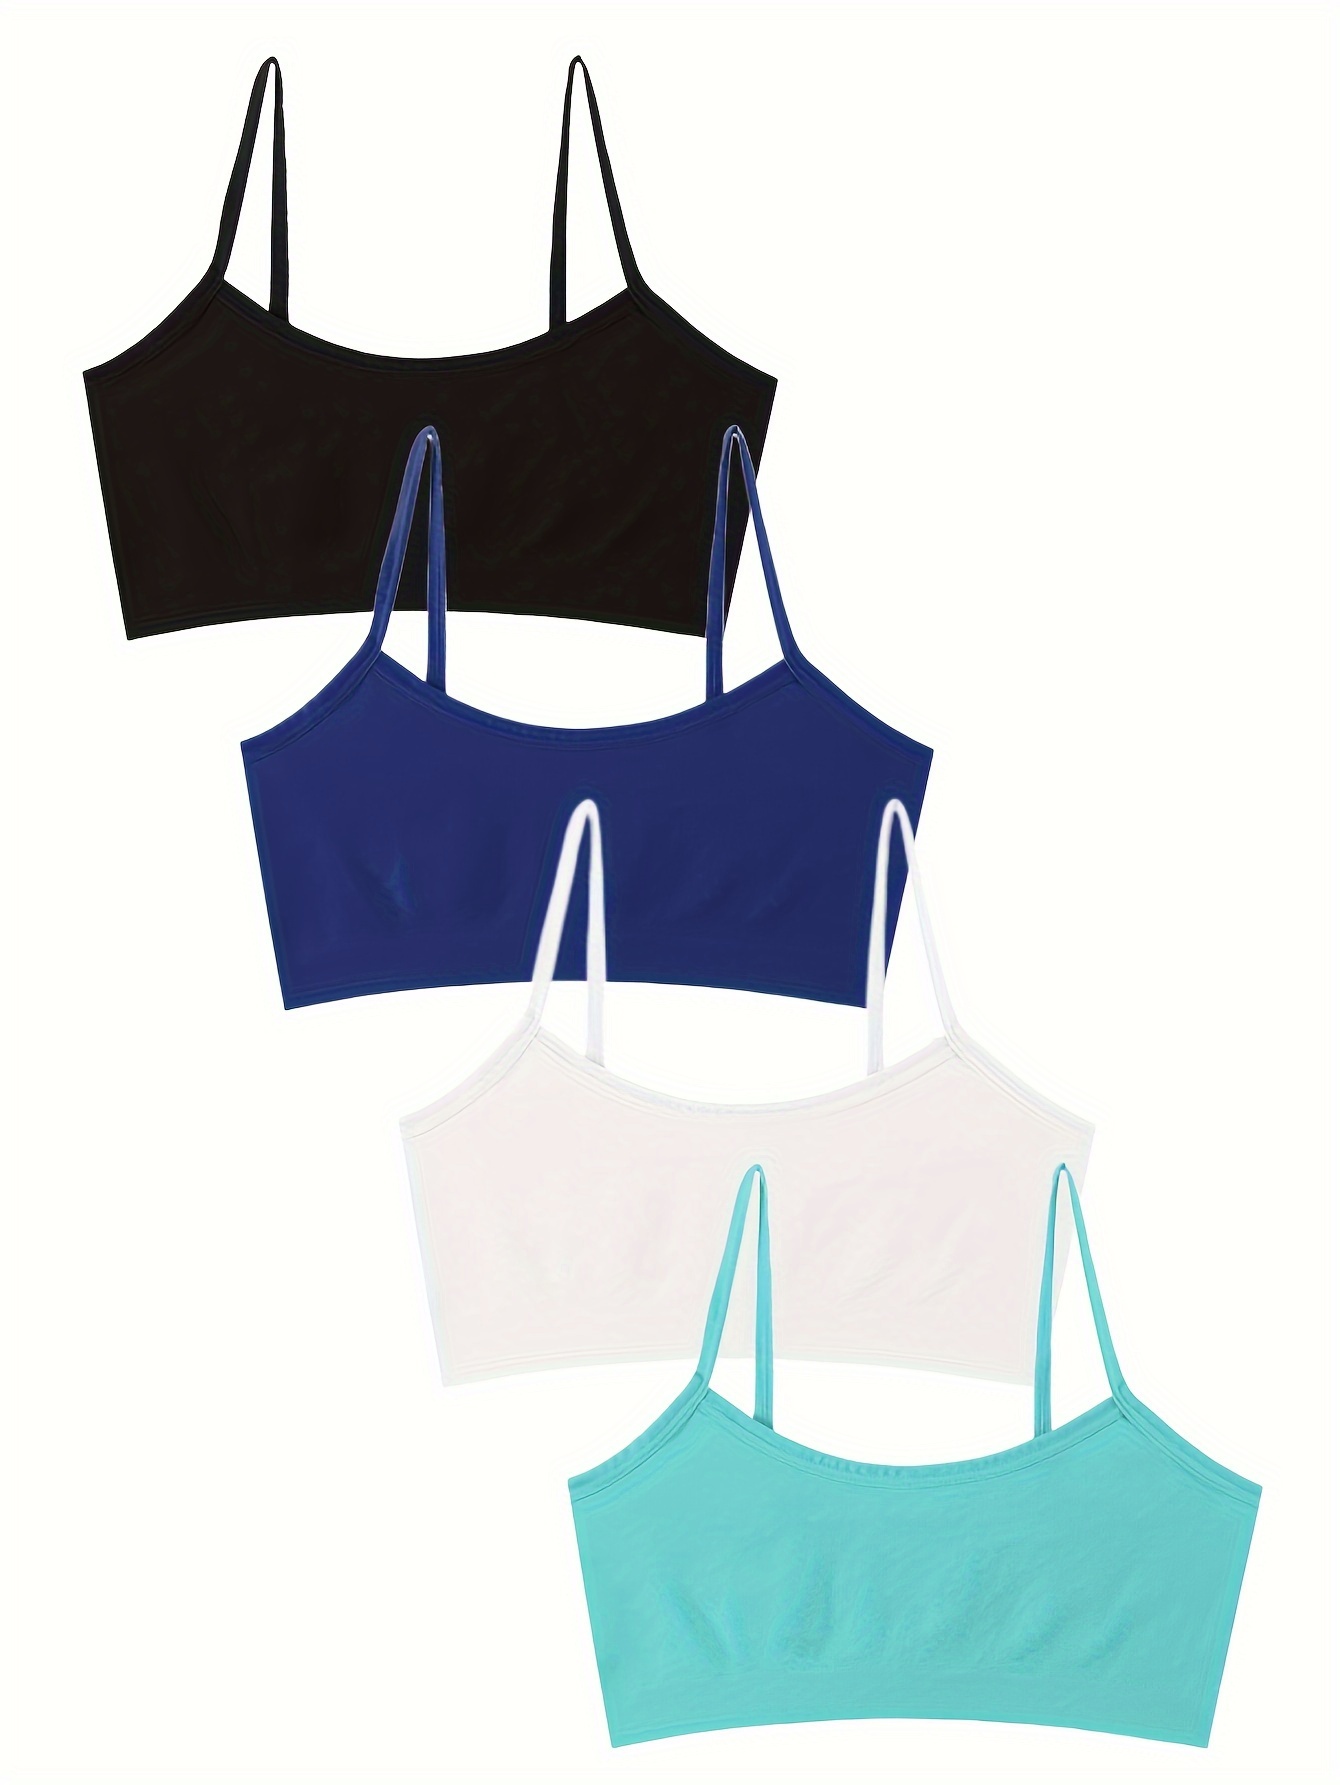 Sis & Angel - Comfy training bras! The perfect companion for a growing  girl! Find cute and comfortable training bra styles right here, perfect for  teens from 7-18 years old. Feel supported